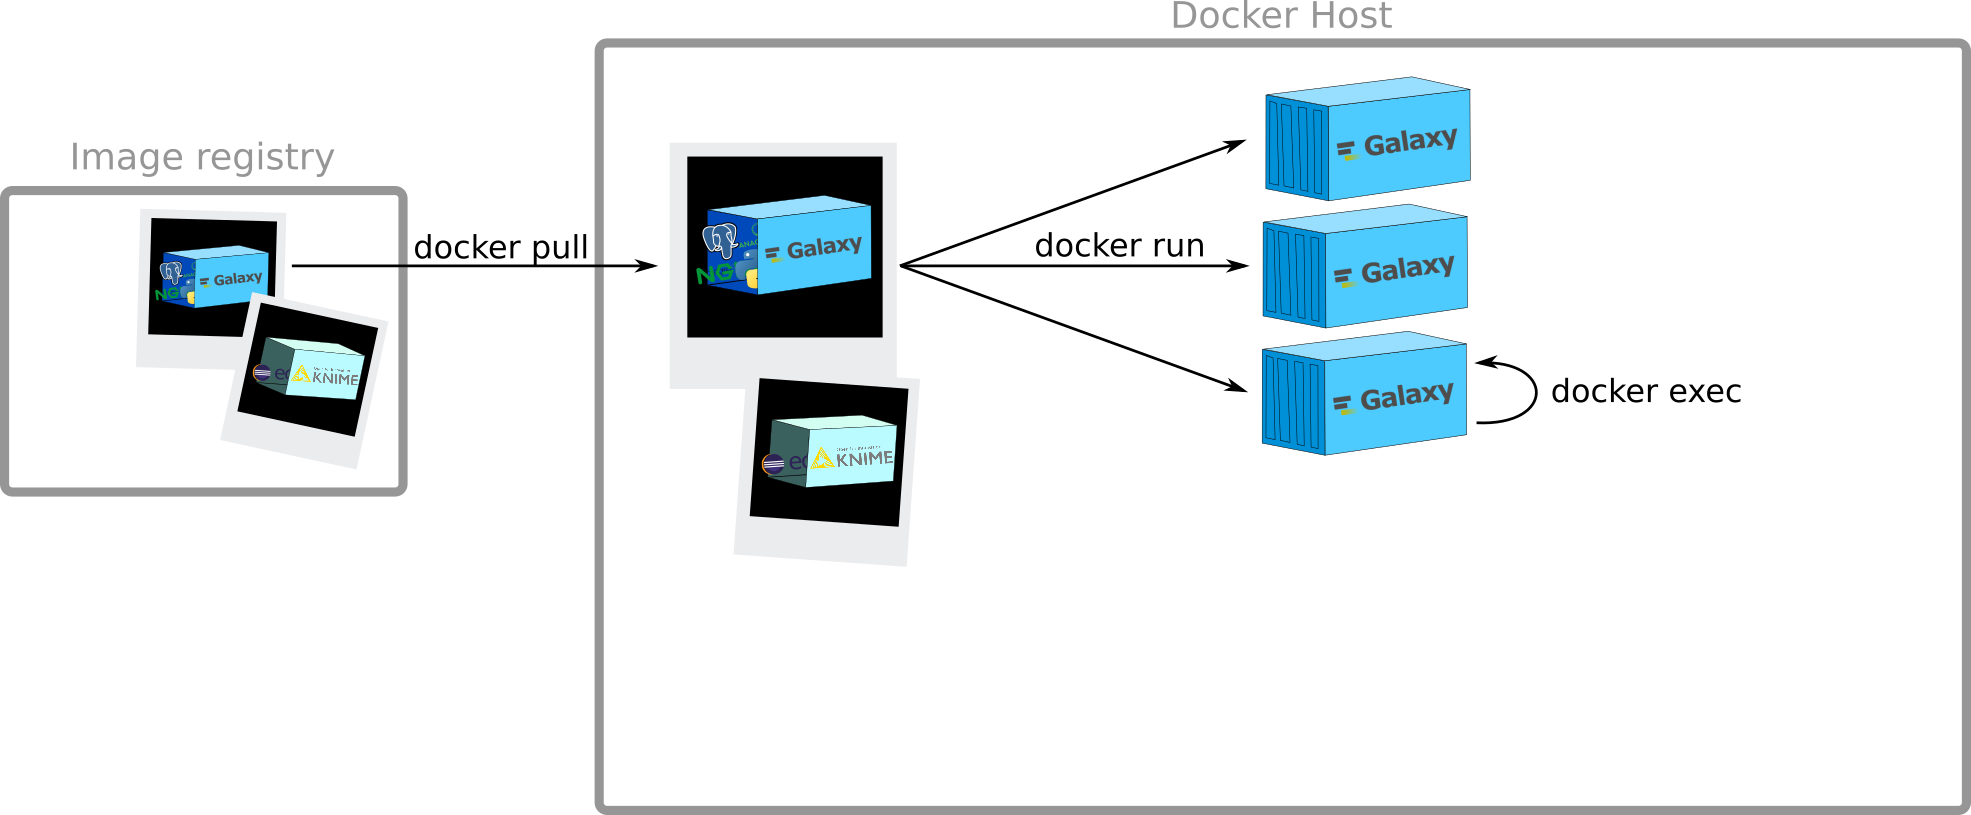 The schematic of a docker host with three galaxies is running, docker exec points to one of the galaxy containers.